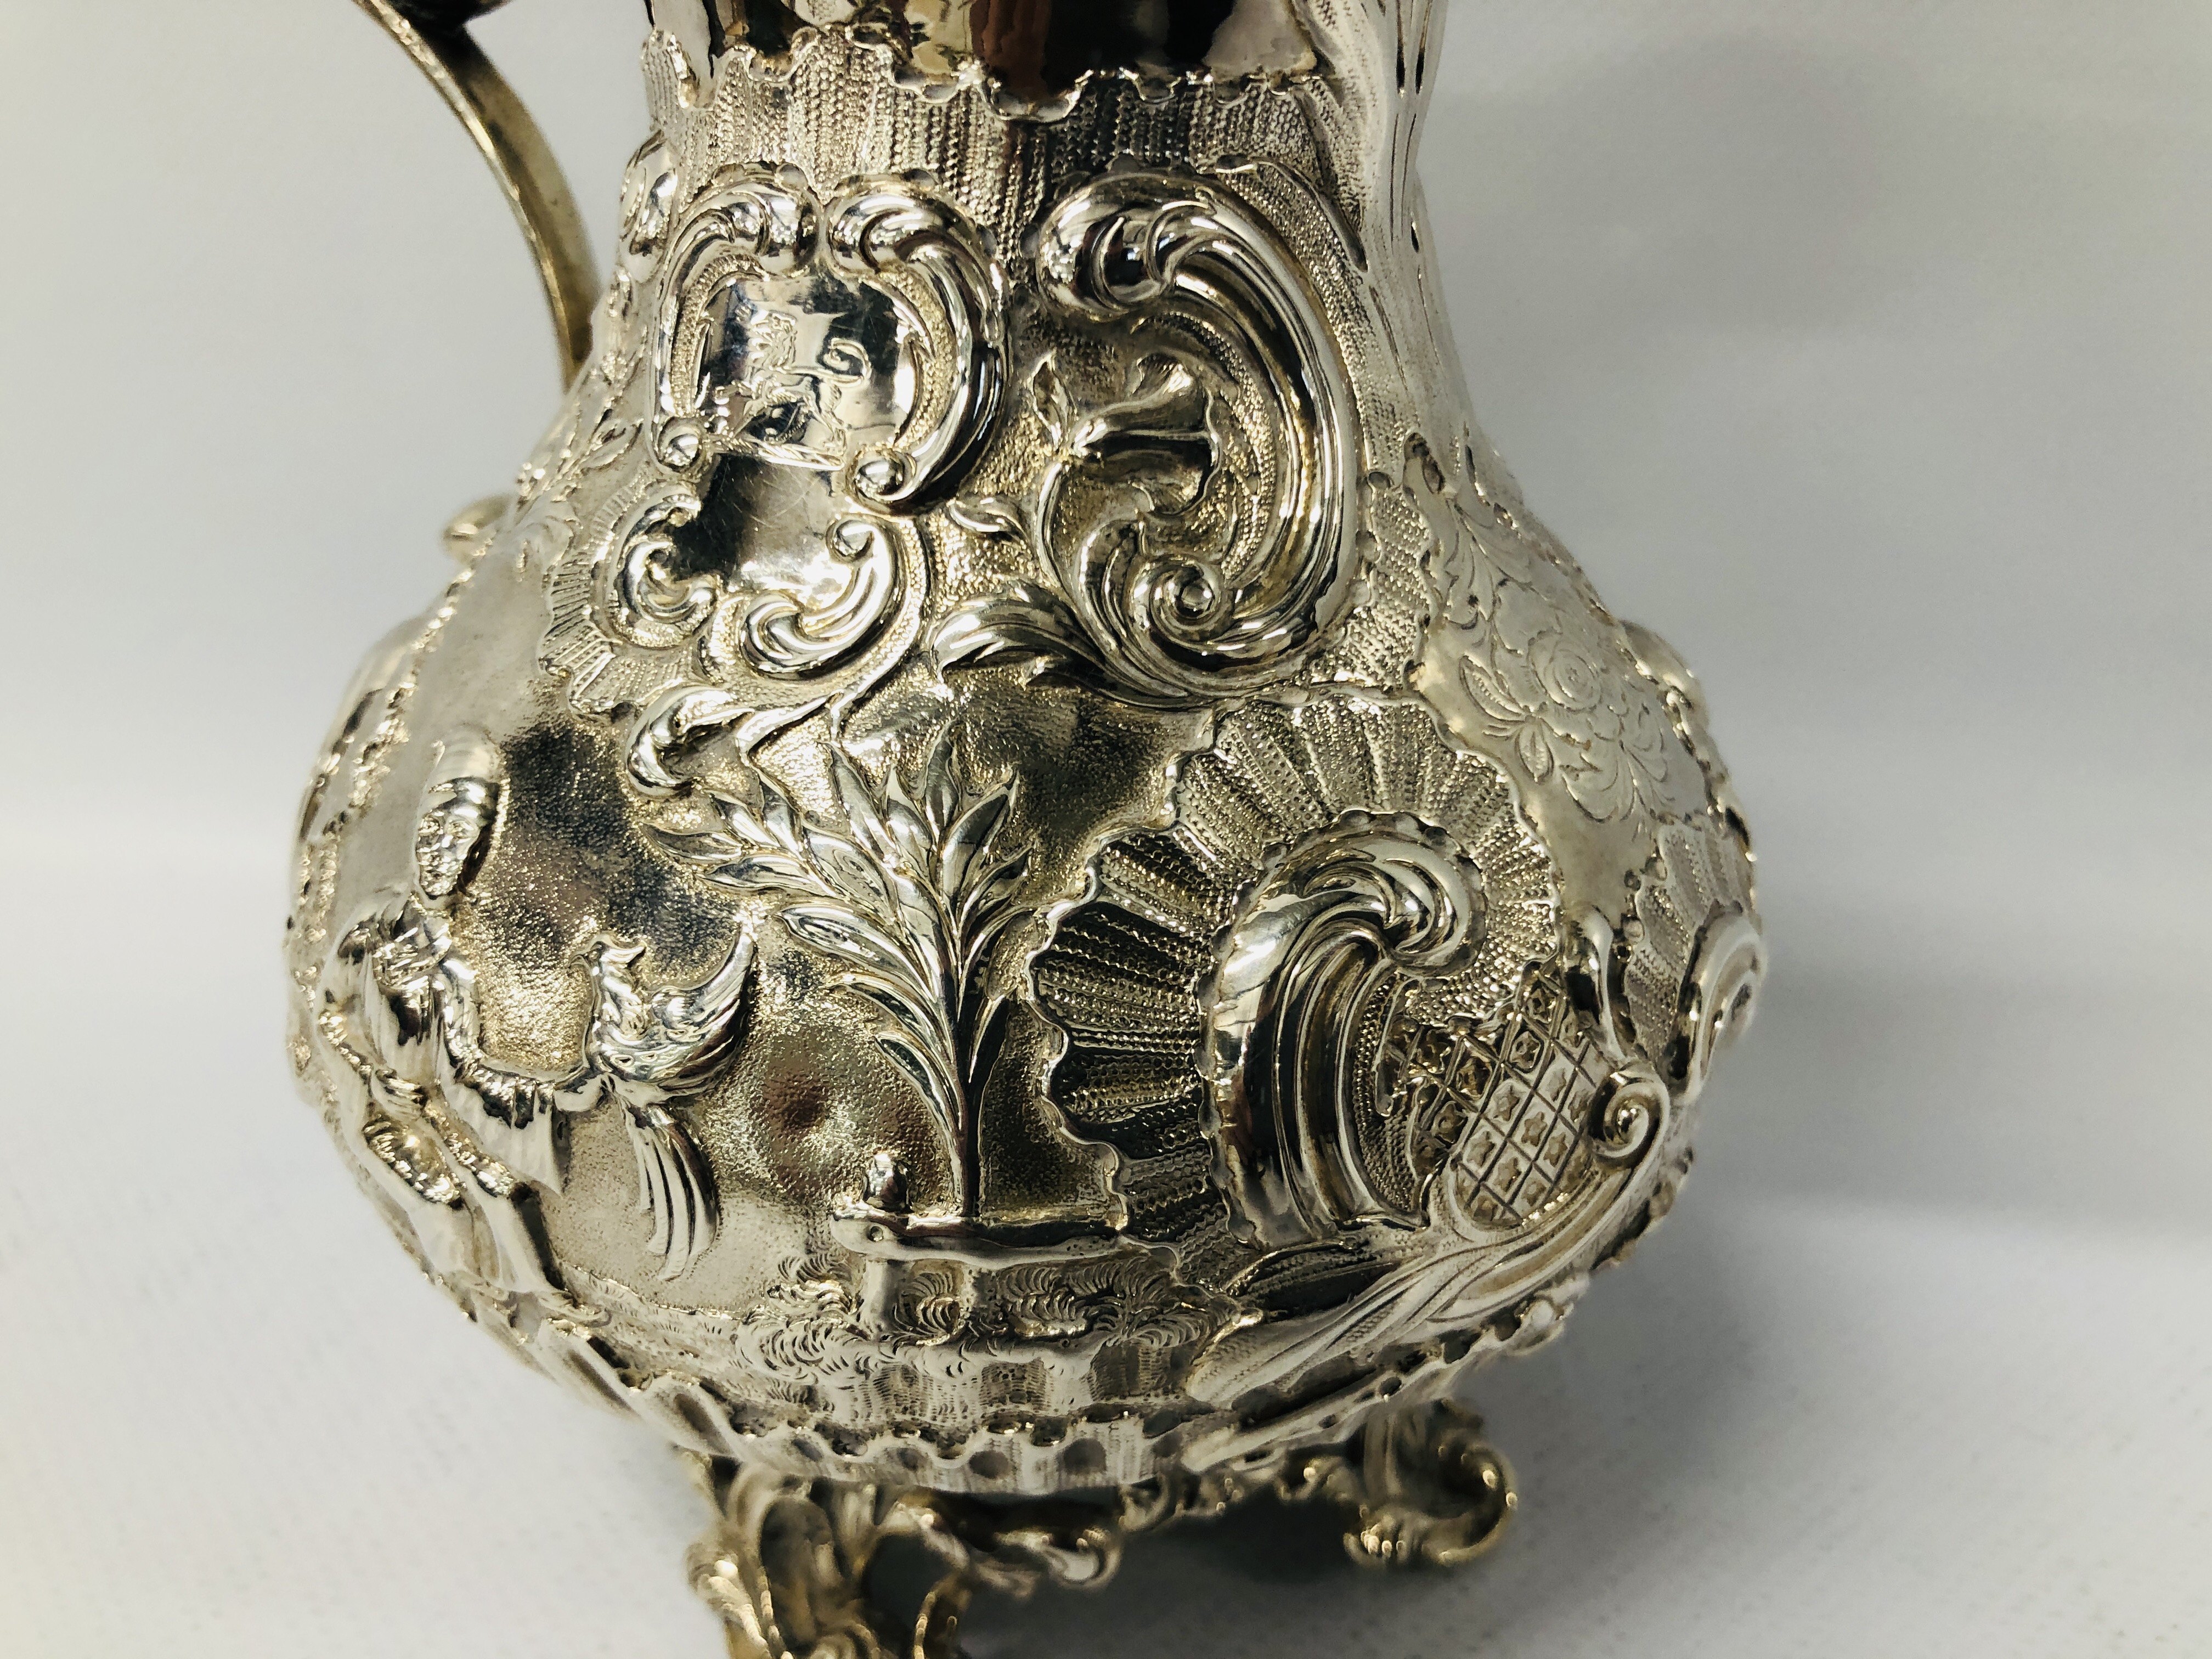 A SILVER MILK JUG OF ROCOCO DESIGN DECORATED WITH CHINOISERIE FIGURES WITH INSCRIPTION MR AND MRS J. - Image 17 of 25